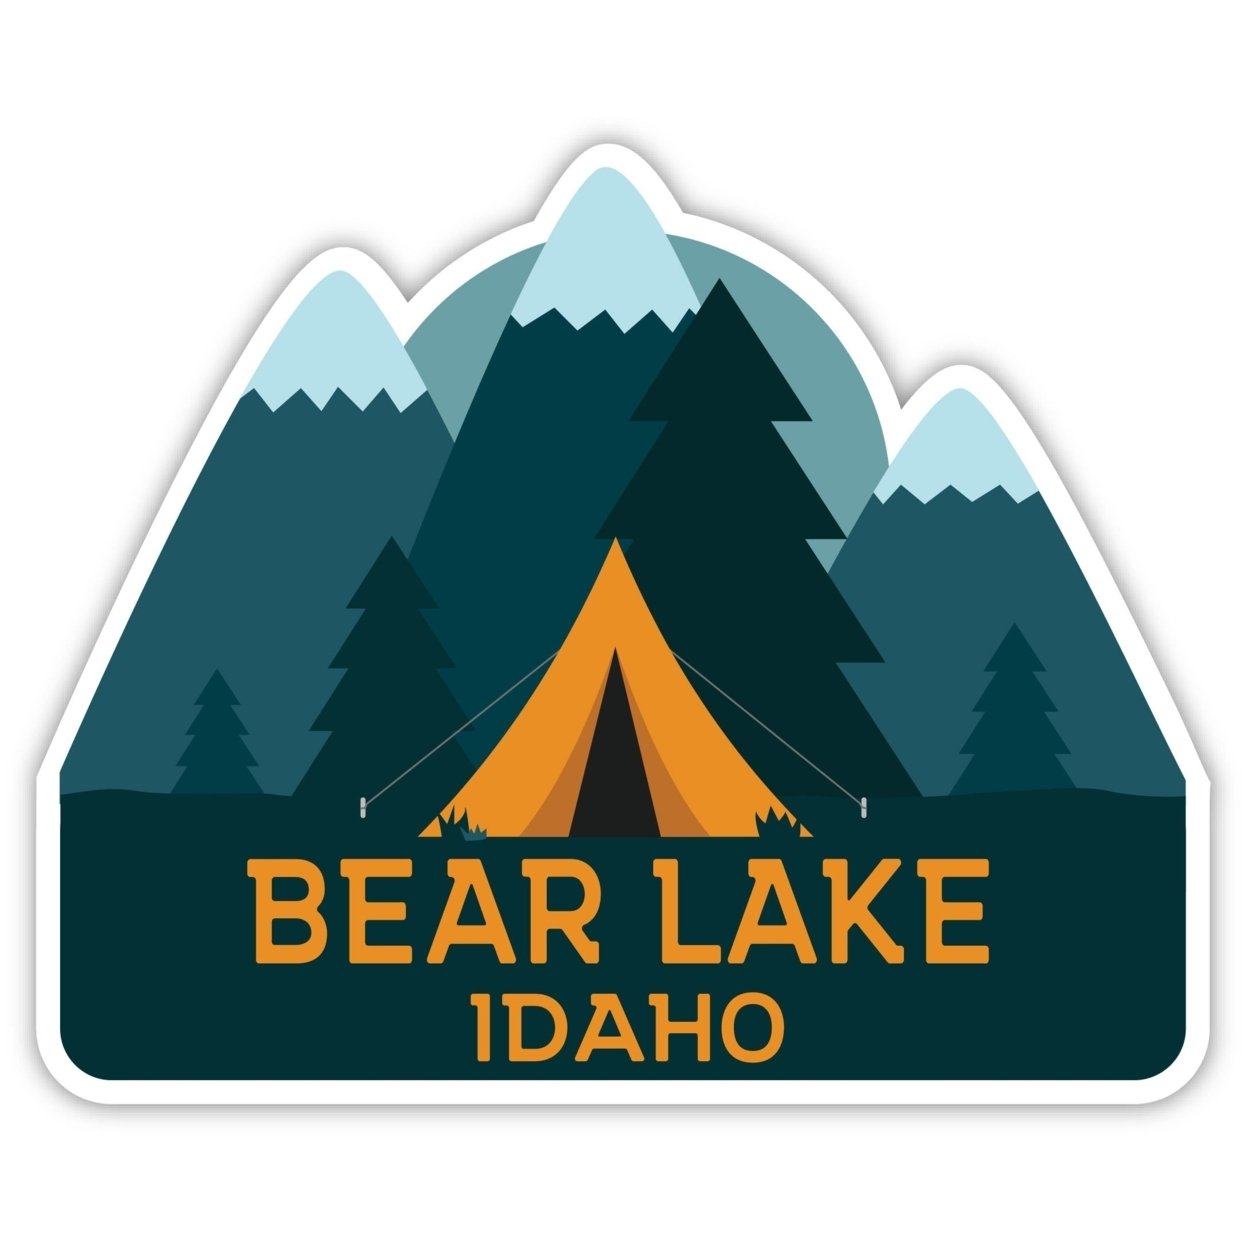 Bear Lake Idaho Souvenir Decorative Stickers (Choose Theme And Size) - 4-Pack, 12-Inch, Tent